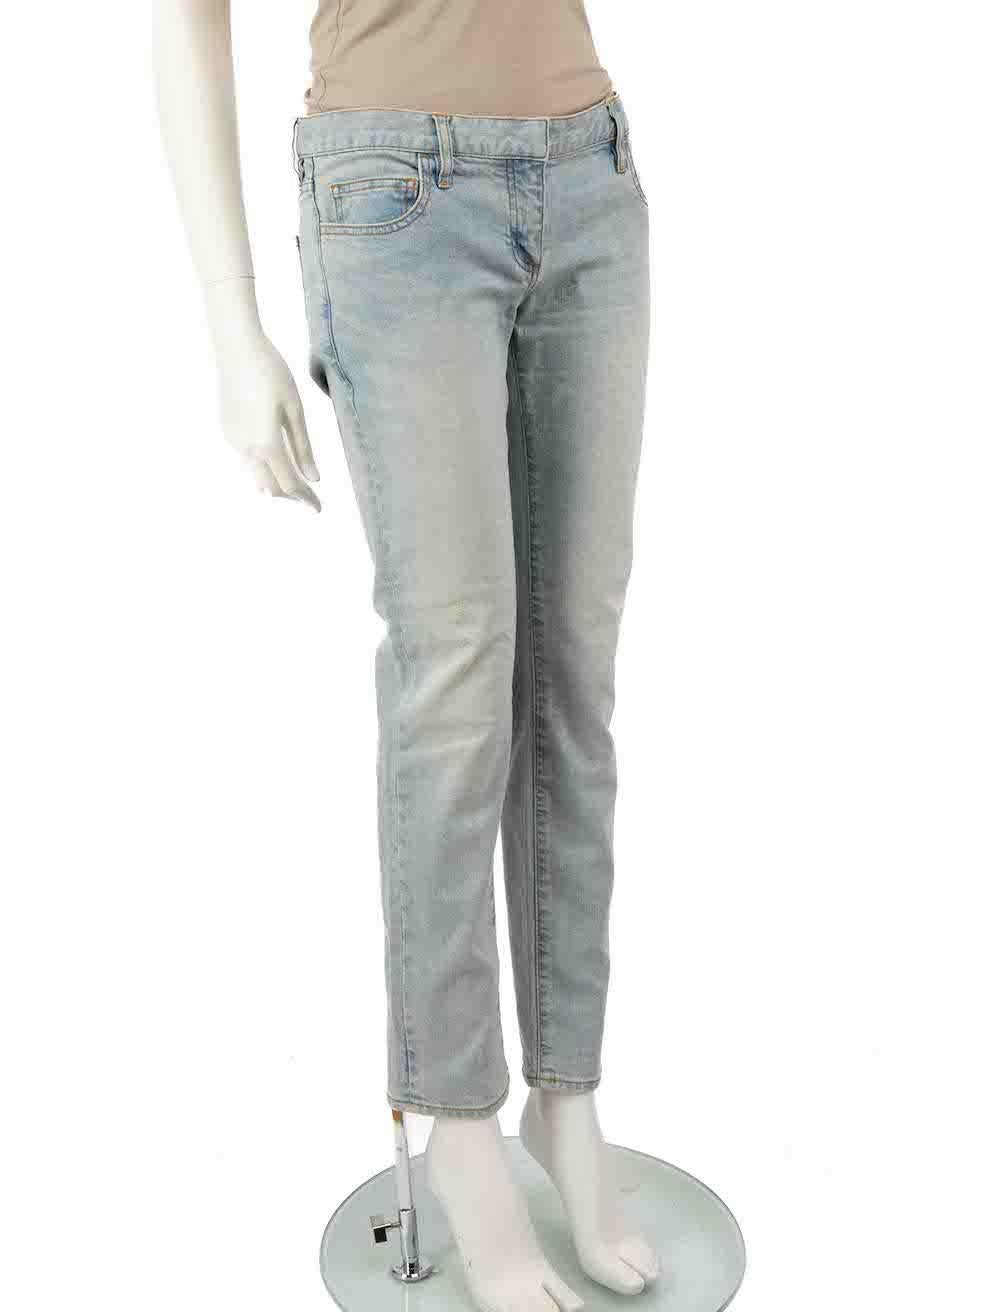 CONDITION is Very good. Minimal wear to jeans is evident. Minimal wear to the back of the waist band is seen with a discolouration mark and general wear on the hemlines on this used Balmain designer resale item.
 
 
 
 Details
 
 
 Blue
 
 Washed